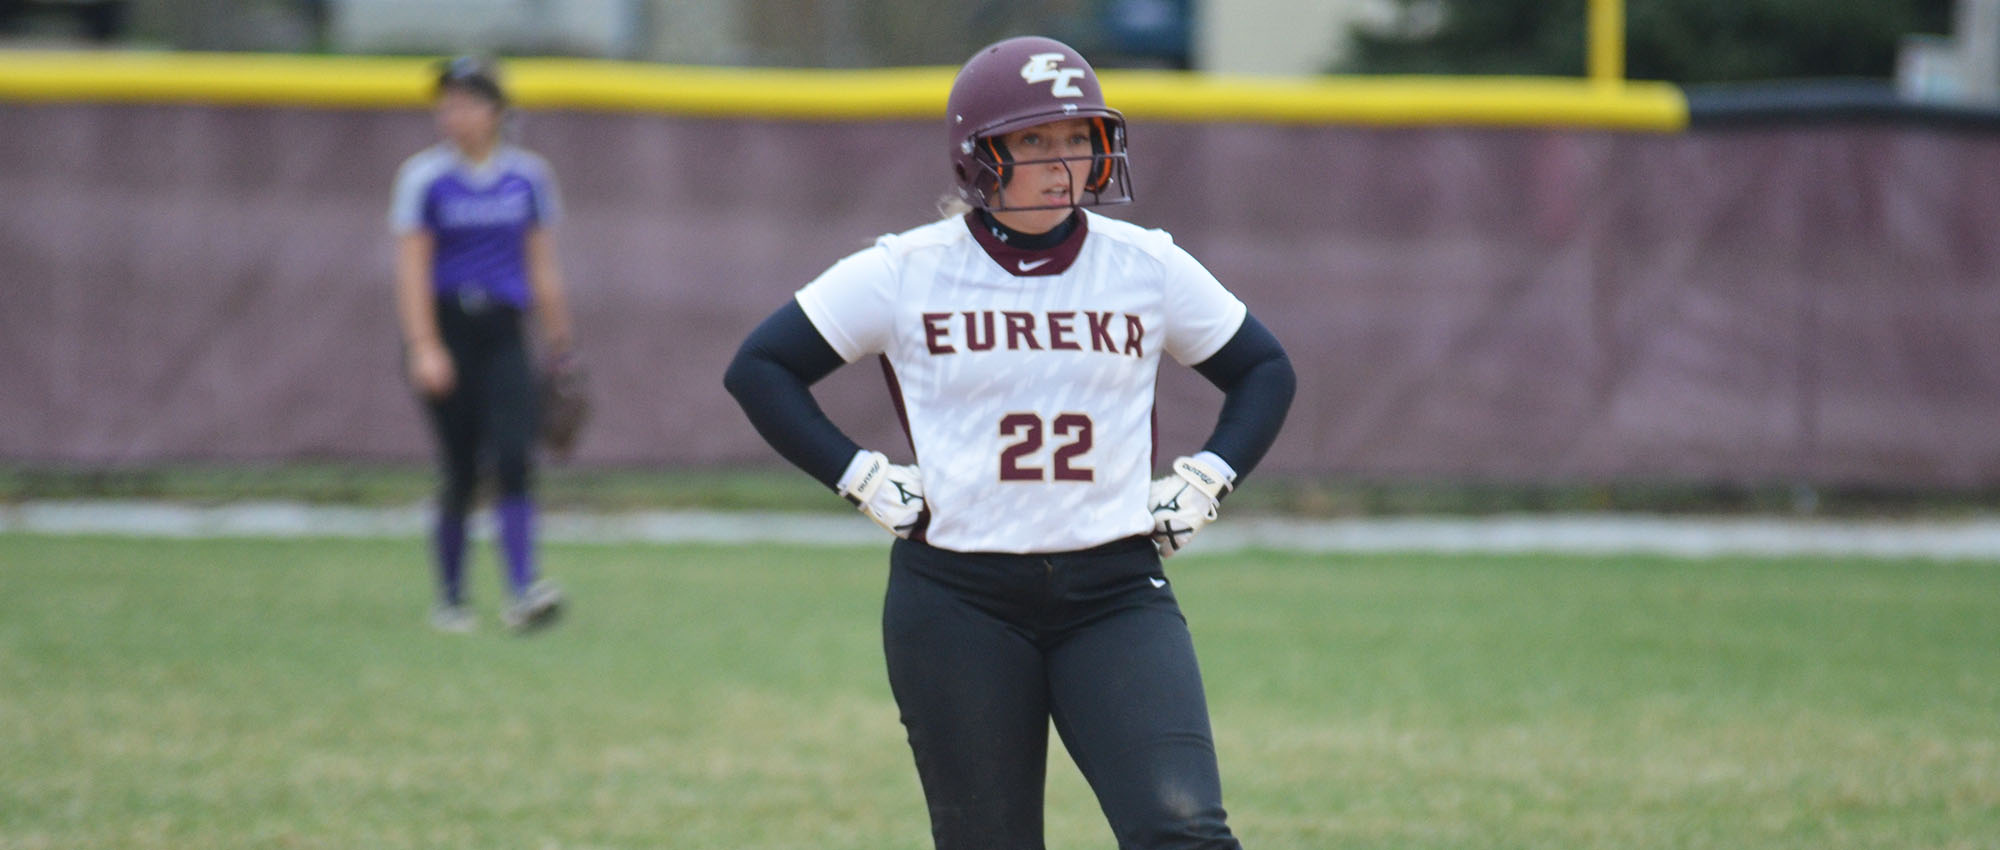 Softball Notebook: Non-Conference Foes Highlight Upcoming Stretch